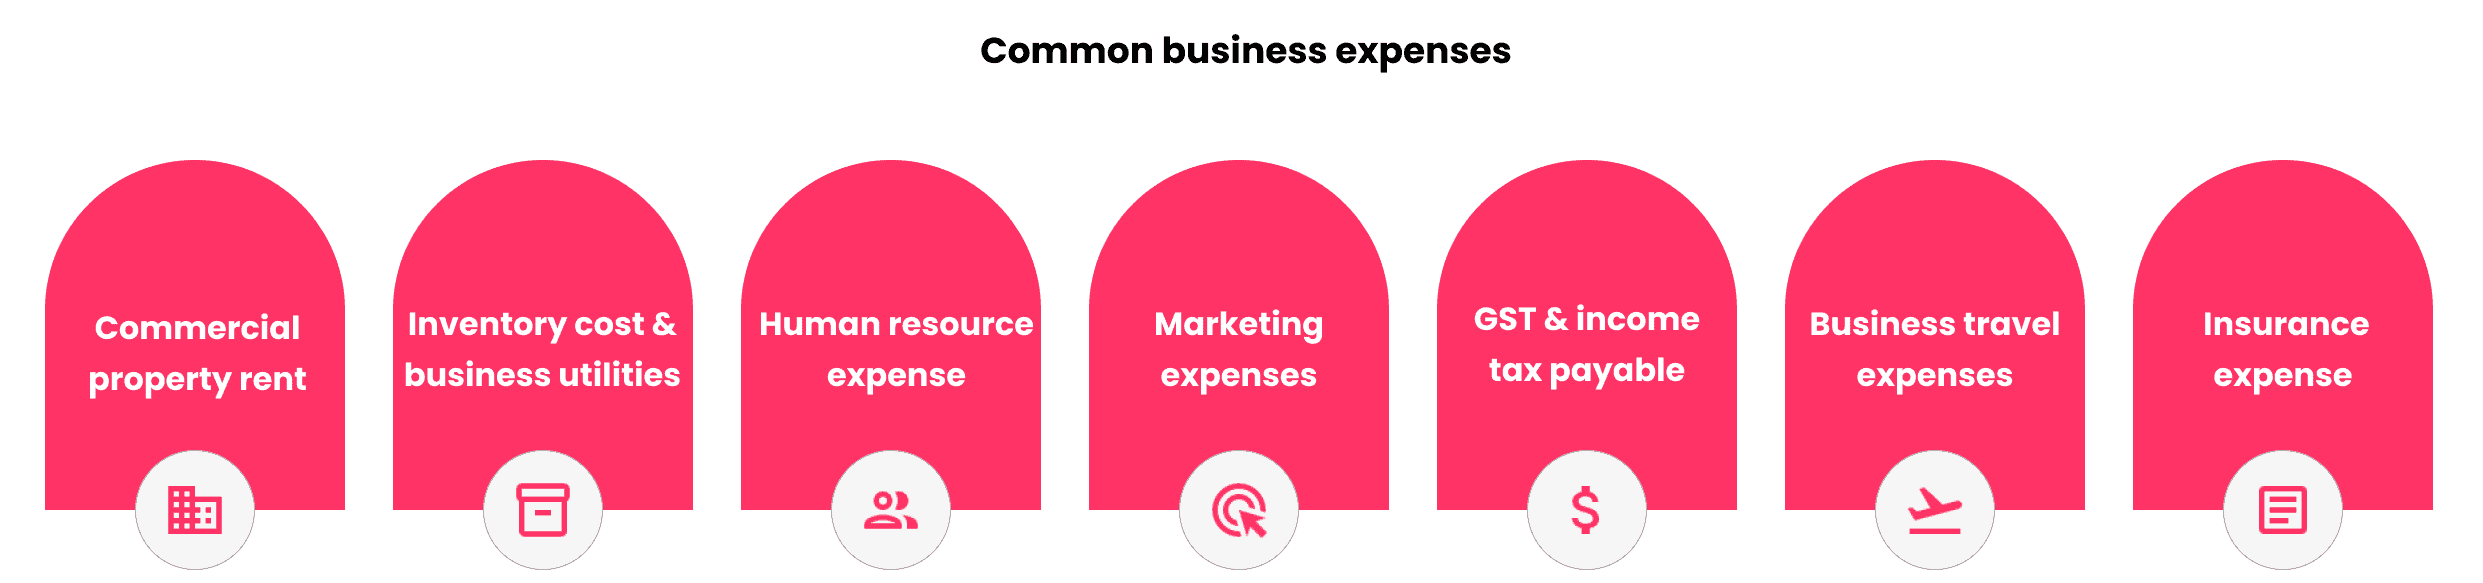 Common business expenses